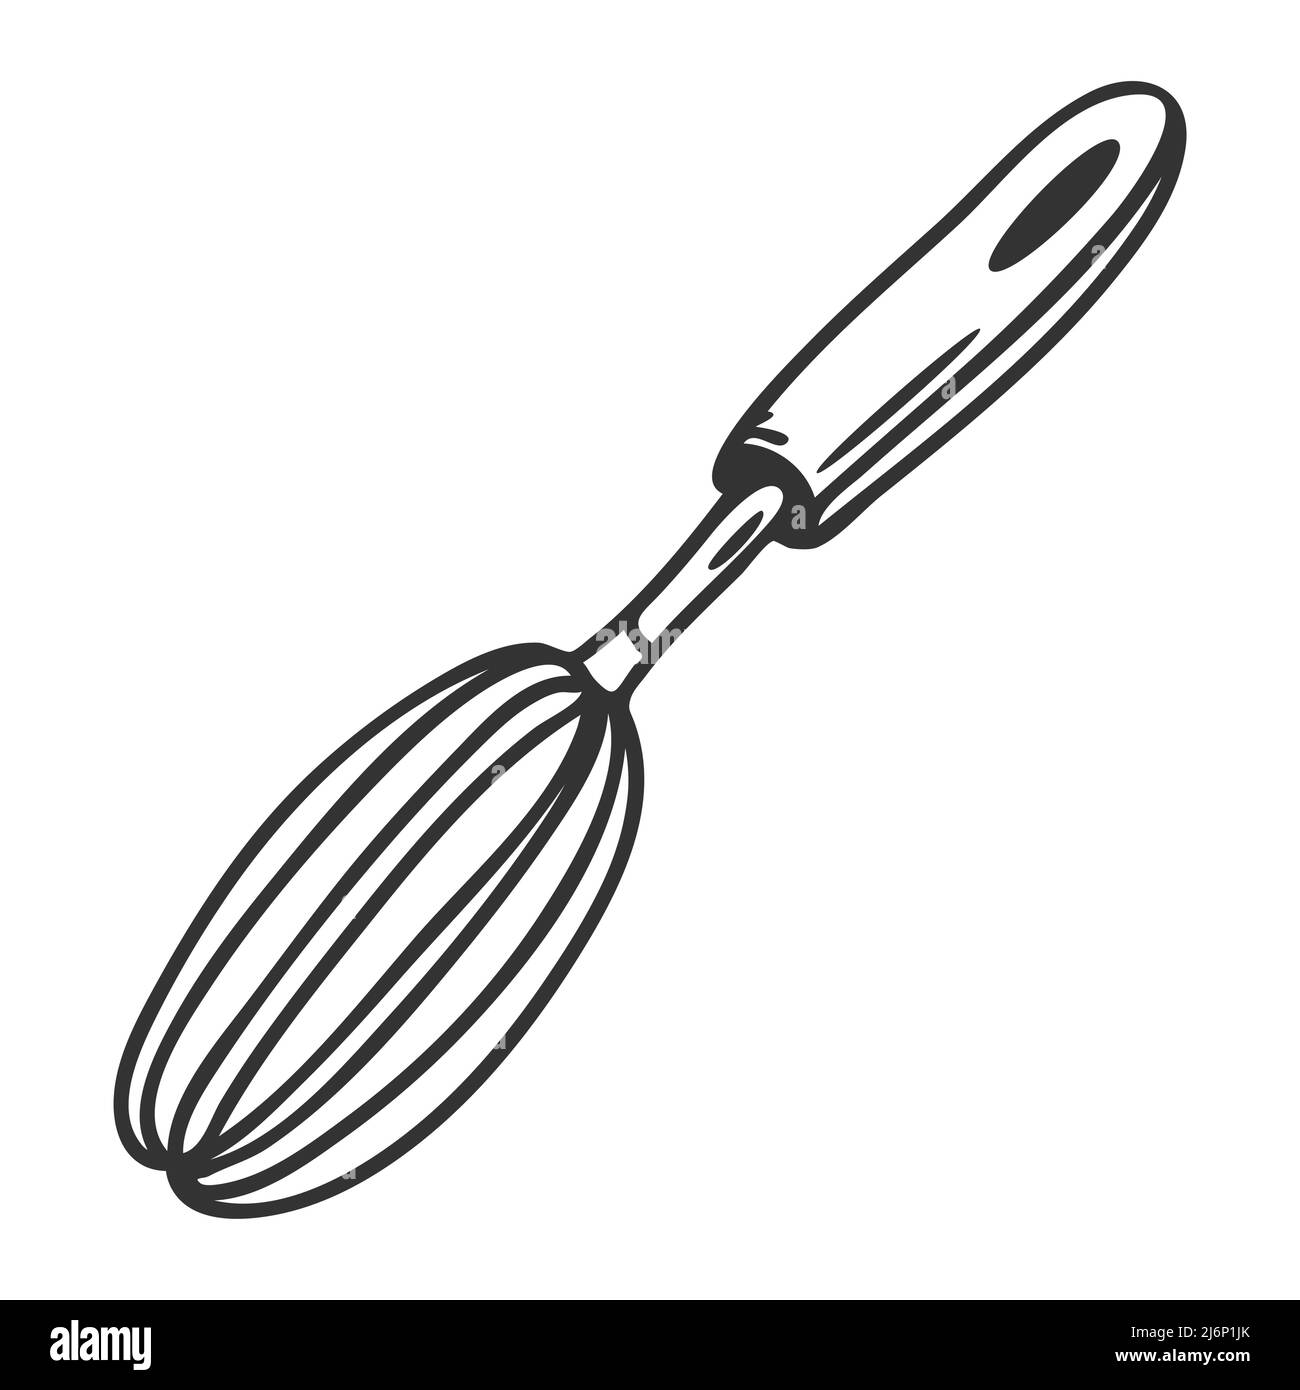 Whisk for whipping. Kitchen utensils, cooking equipment. Design element for decoration menu design, recipes, and food packaging. Hand drawn and isolat Stock Vector